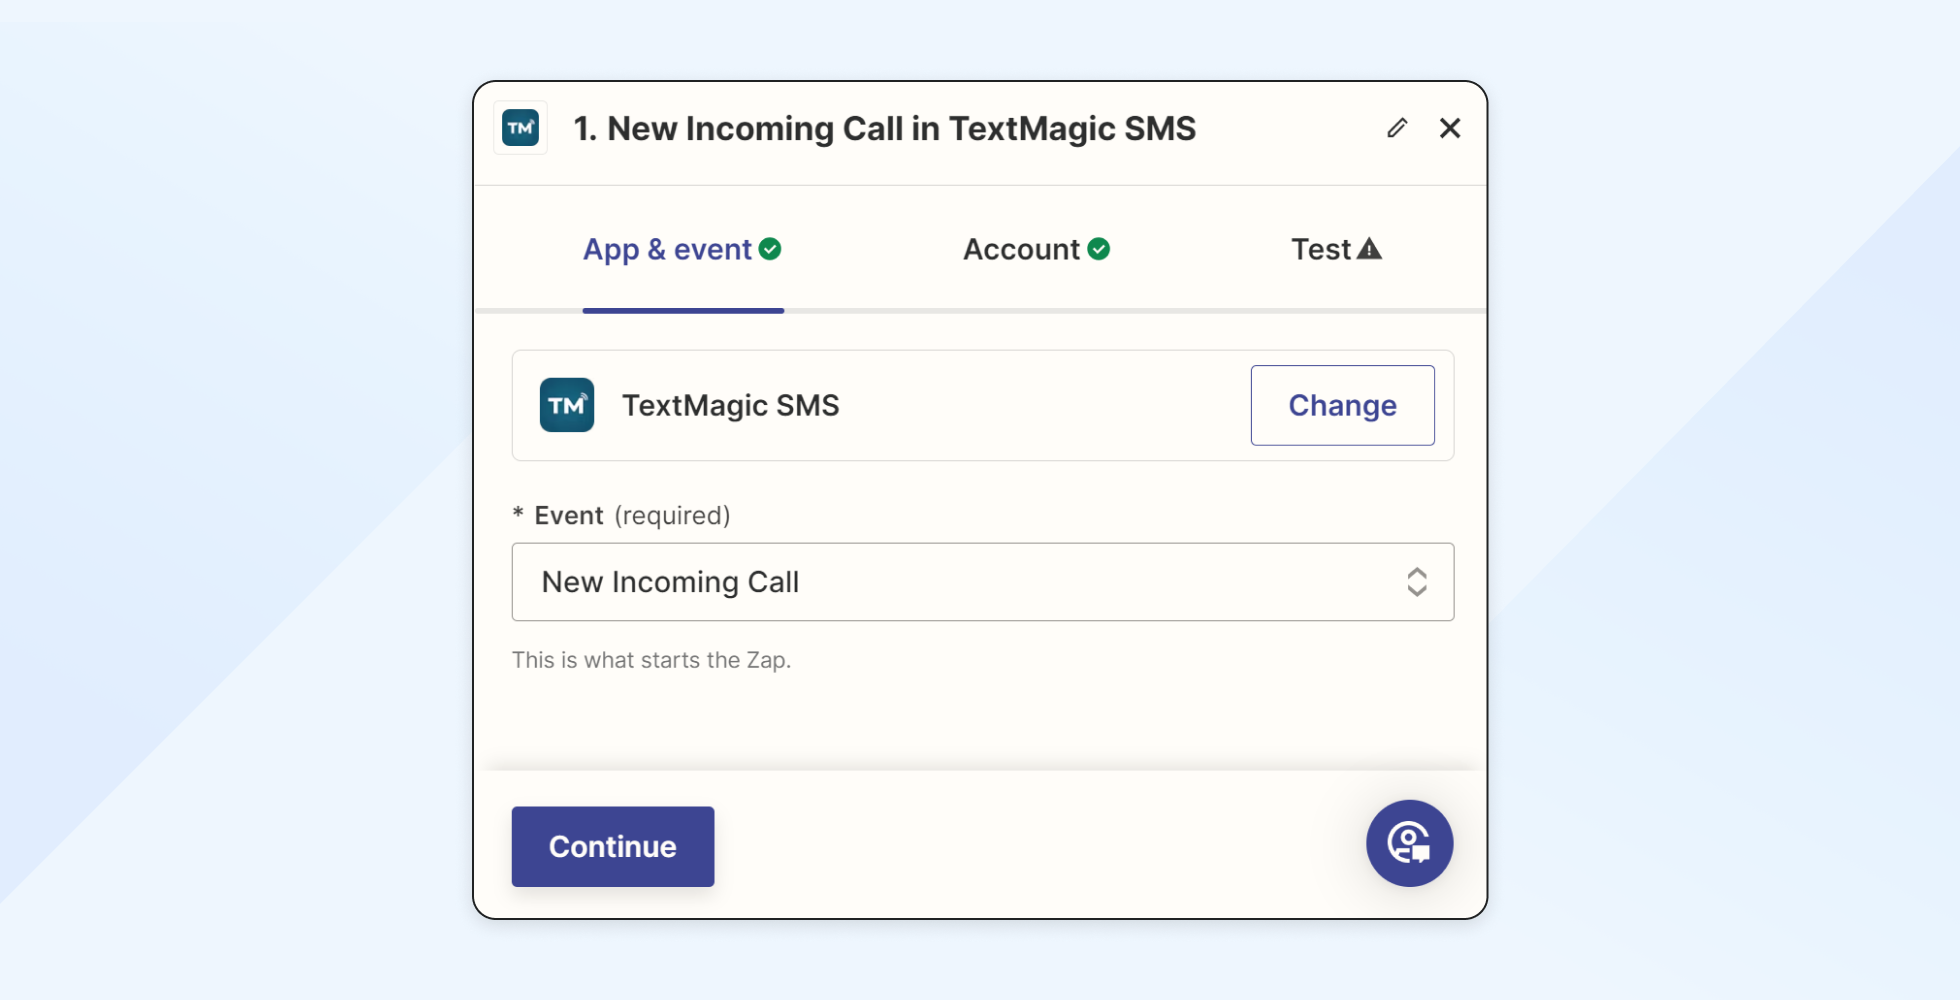 Textmagic and Zapier integration with Gmail - new incoming call